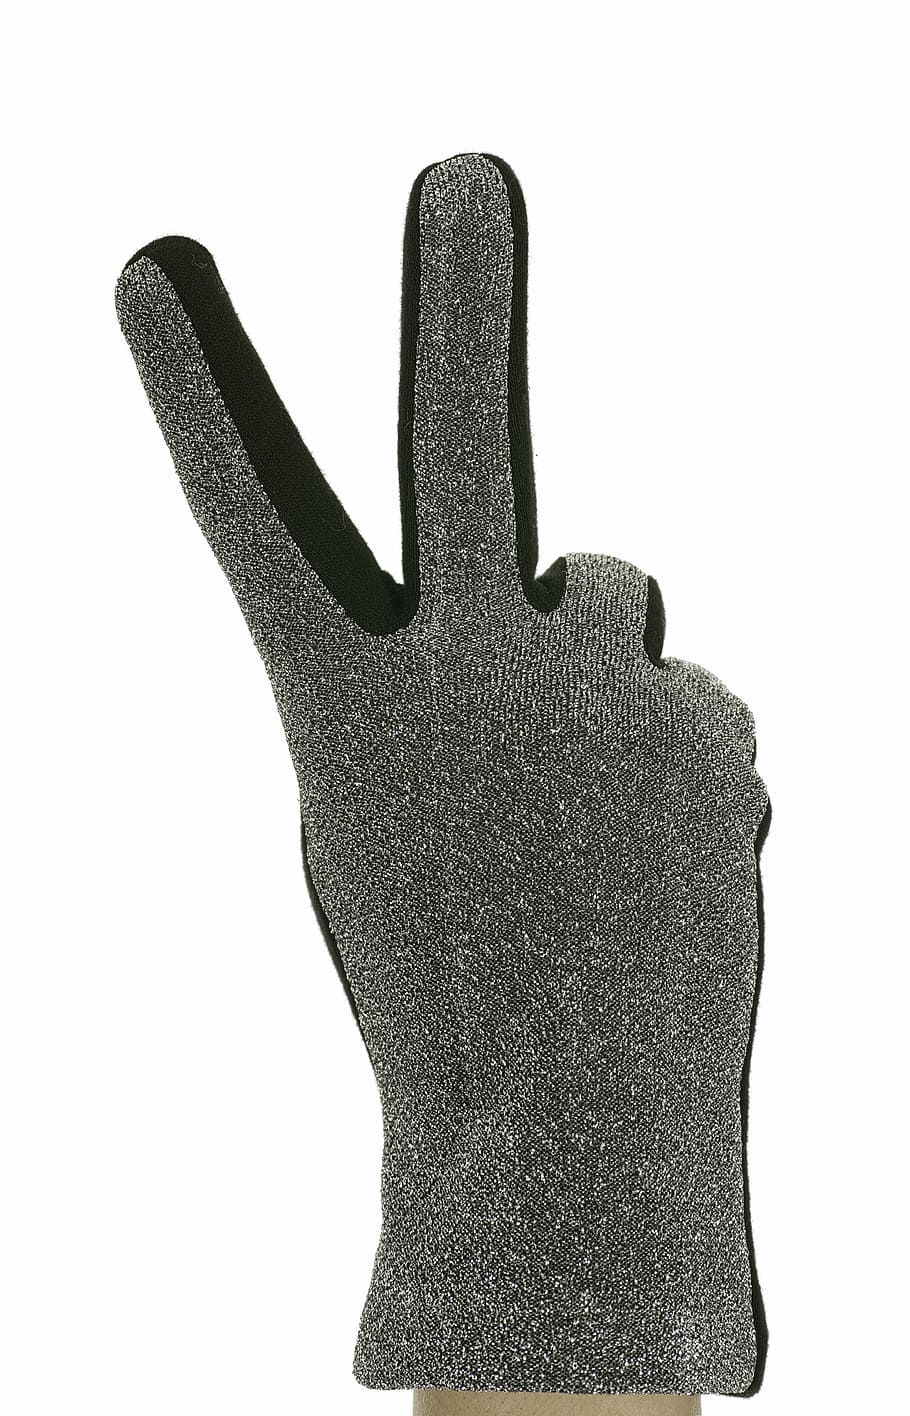 glove, two fingers, peace sign, sign manual, closeup, white background